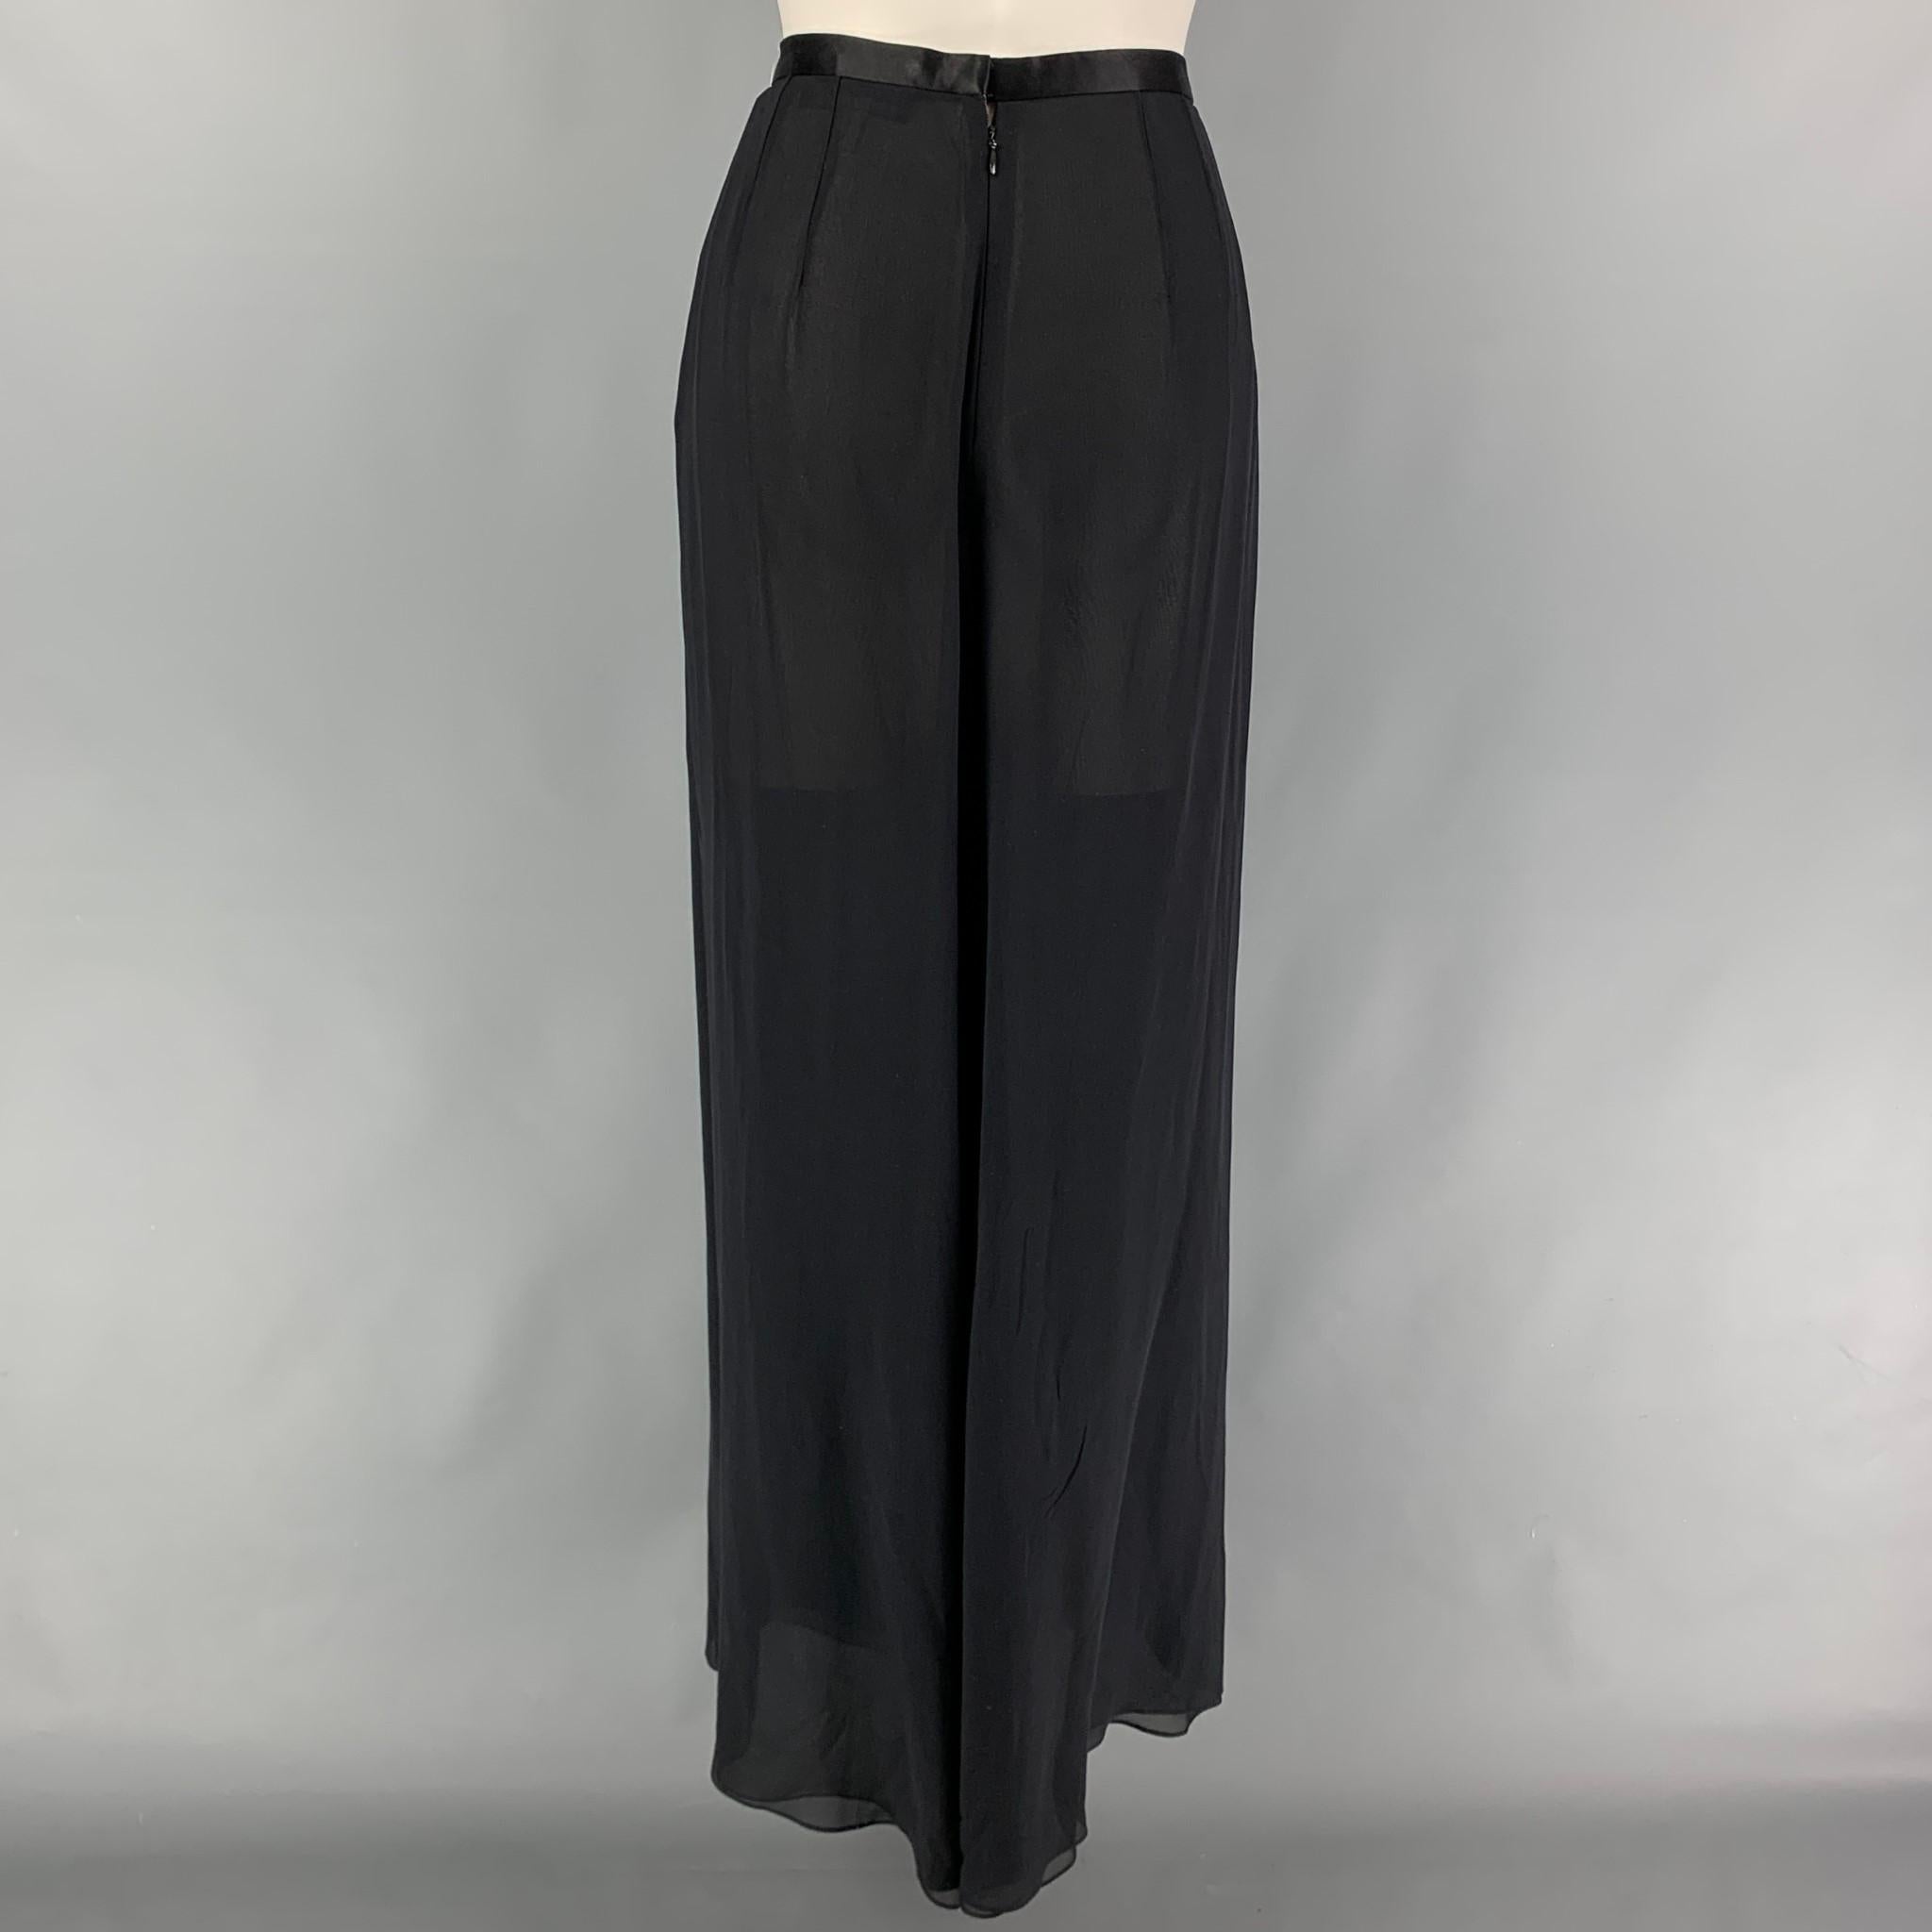 RALPH LAUREN Collection pants comes in a black silk featuring a wide leg style, satin trim, high waist, and a back zip up closure. 

Very Good Pre-Owned Condition.
Marked: 8

Measurements:

Waist: 27 in.
Rise: 14.5 in.
Inseam: 31 in. 